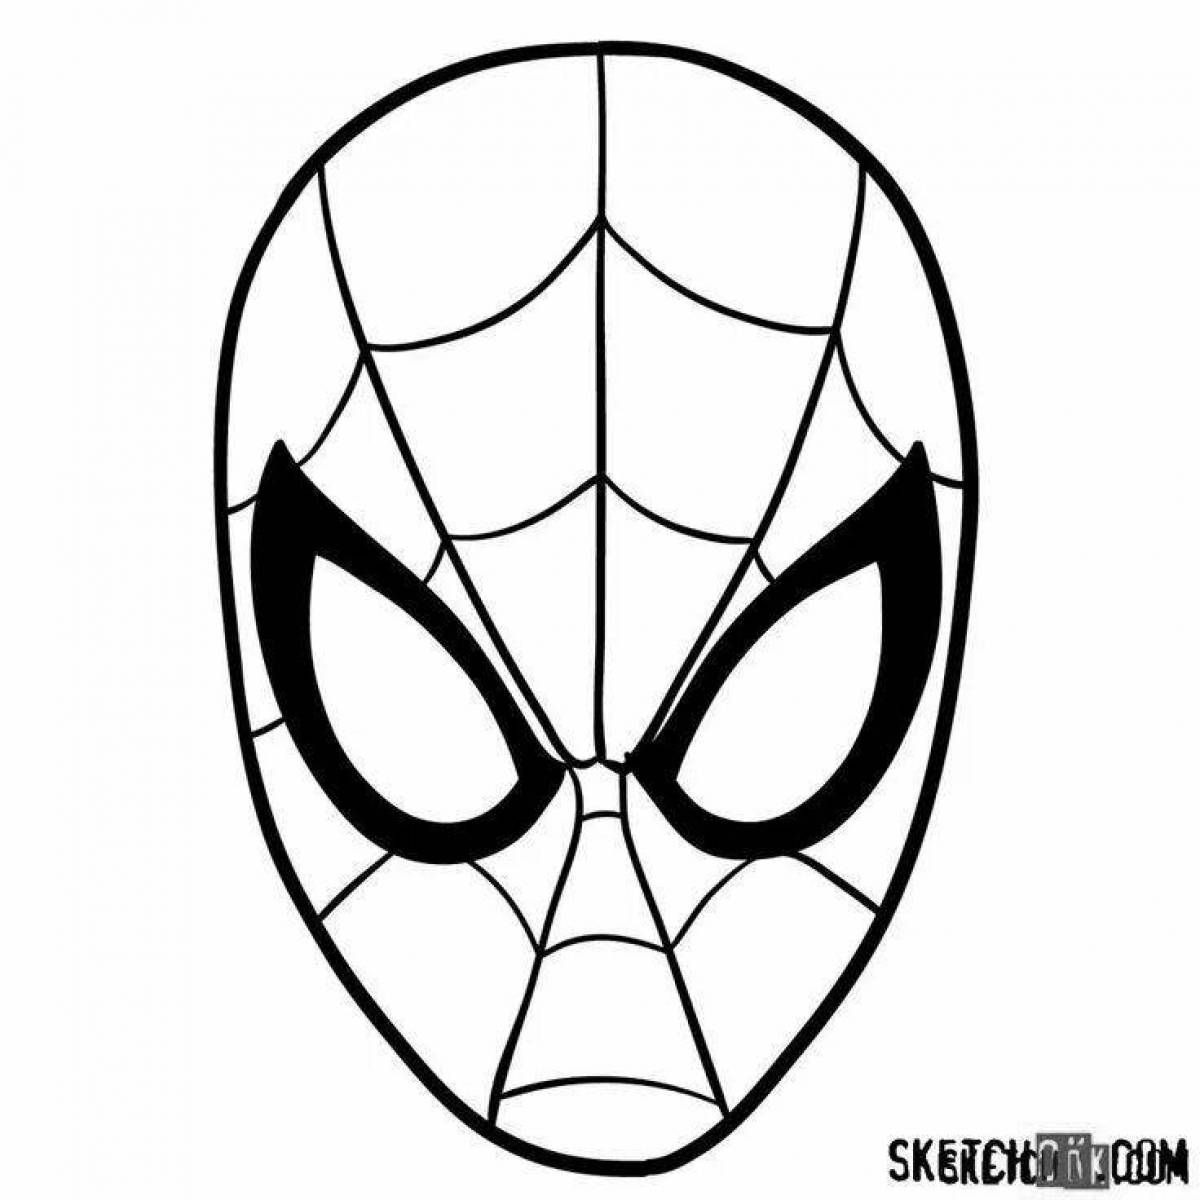 Spiderman animated mask coloring page